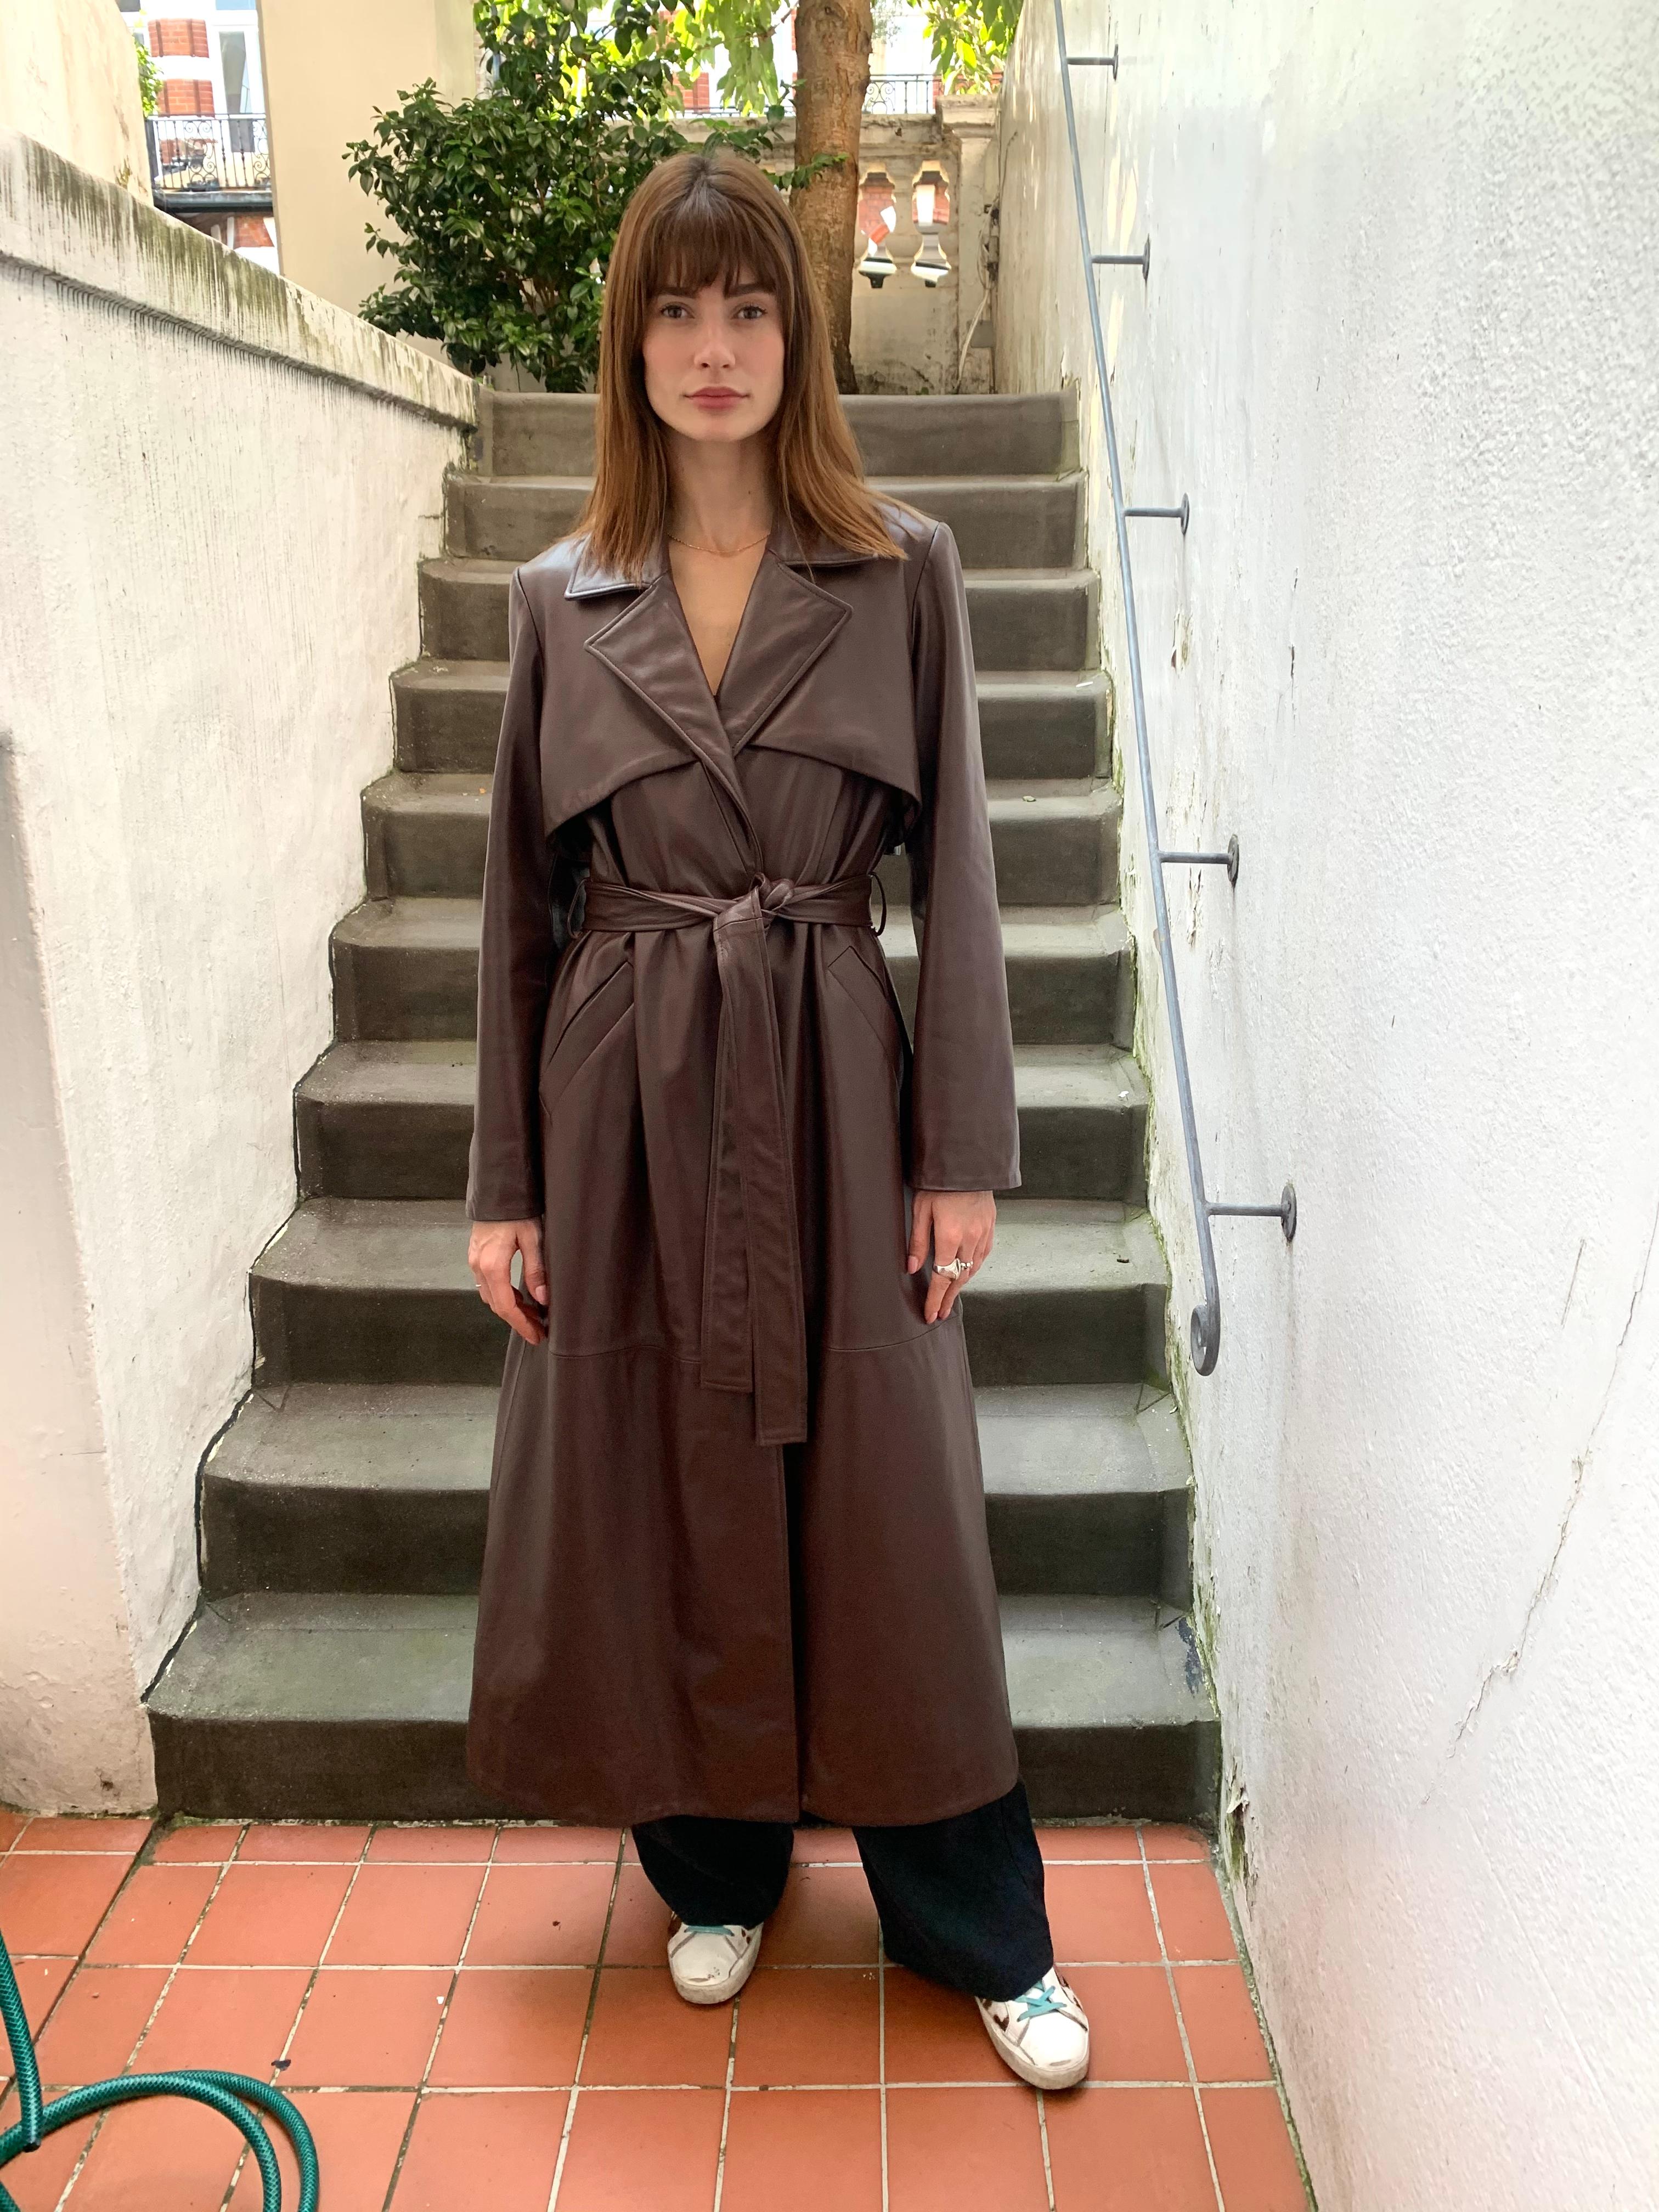 Women's Verheyen London Leather Trench Coat in Chocolate Brown - Size uk 14 For Sale